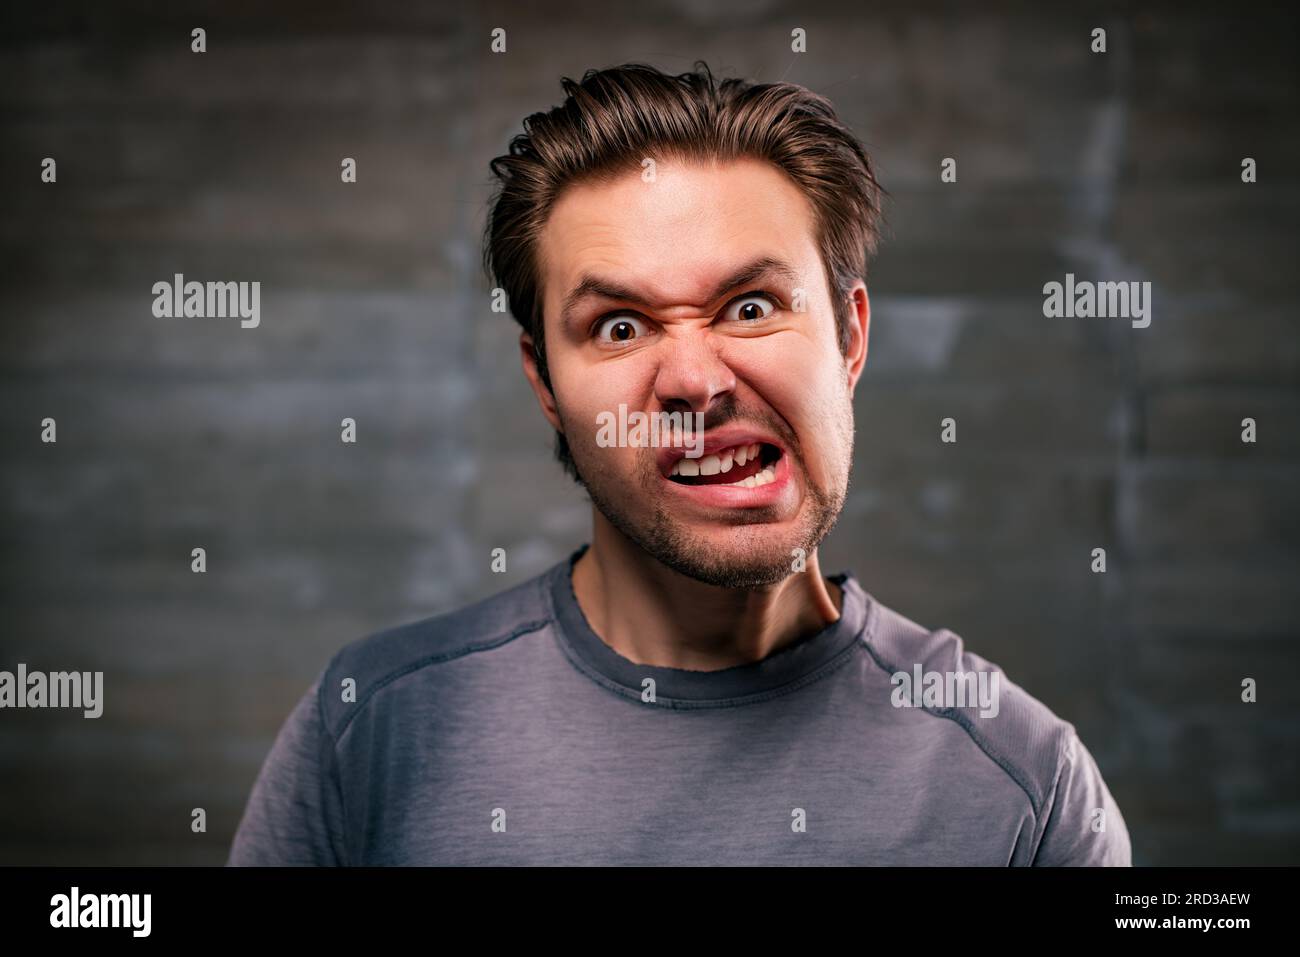 Young crazy man emotional portrait on gray wall background Stock Photo